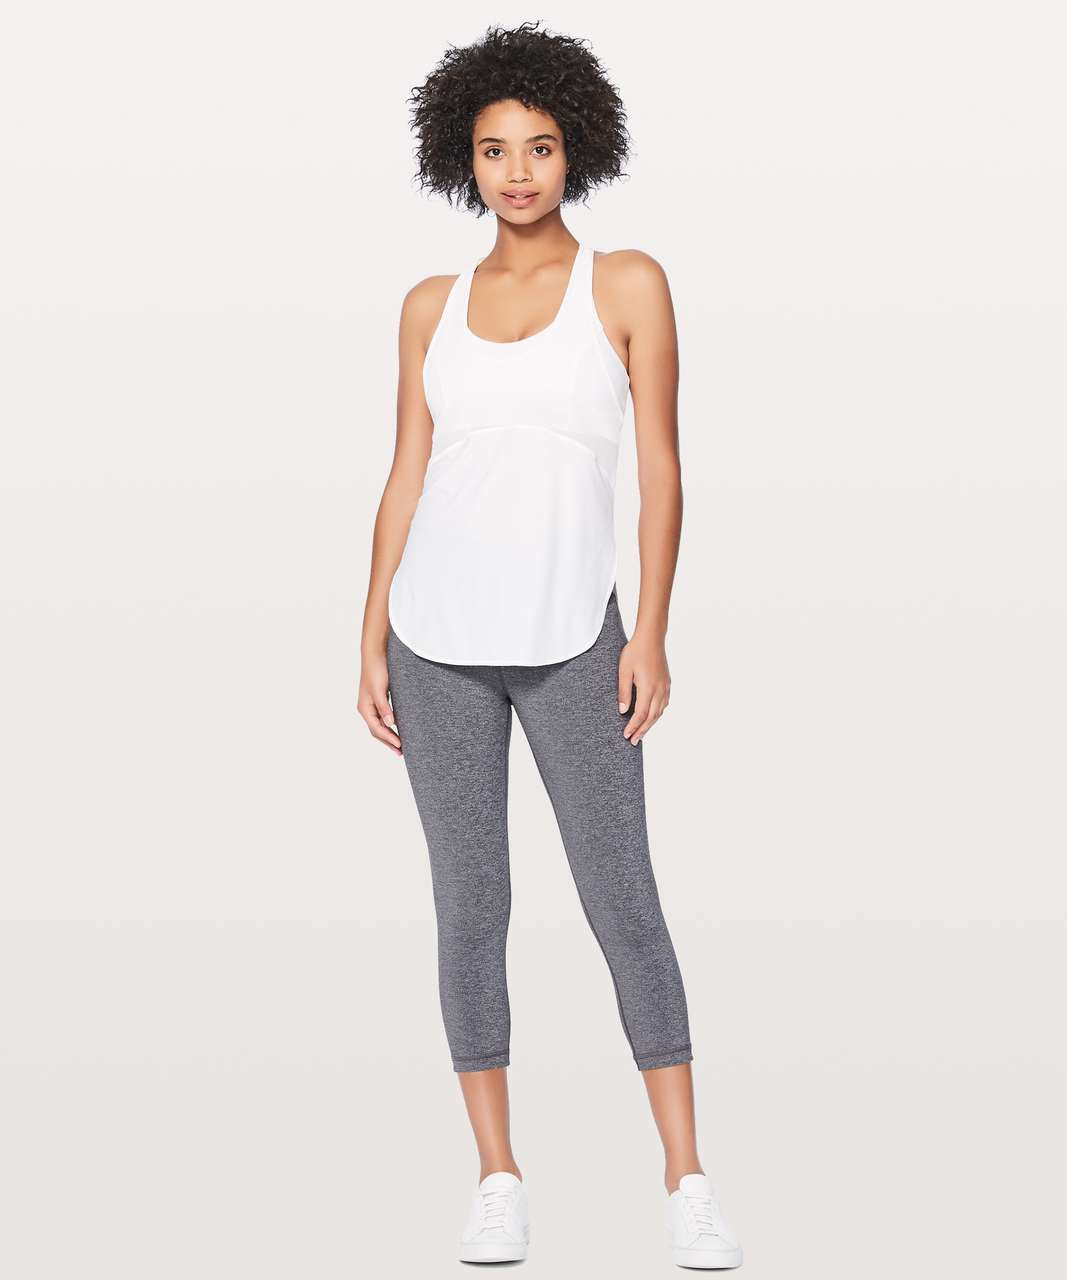 Lululemon Twist Around Tank *Light Support For C/D Cup - White